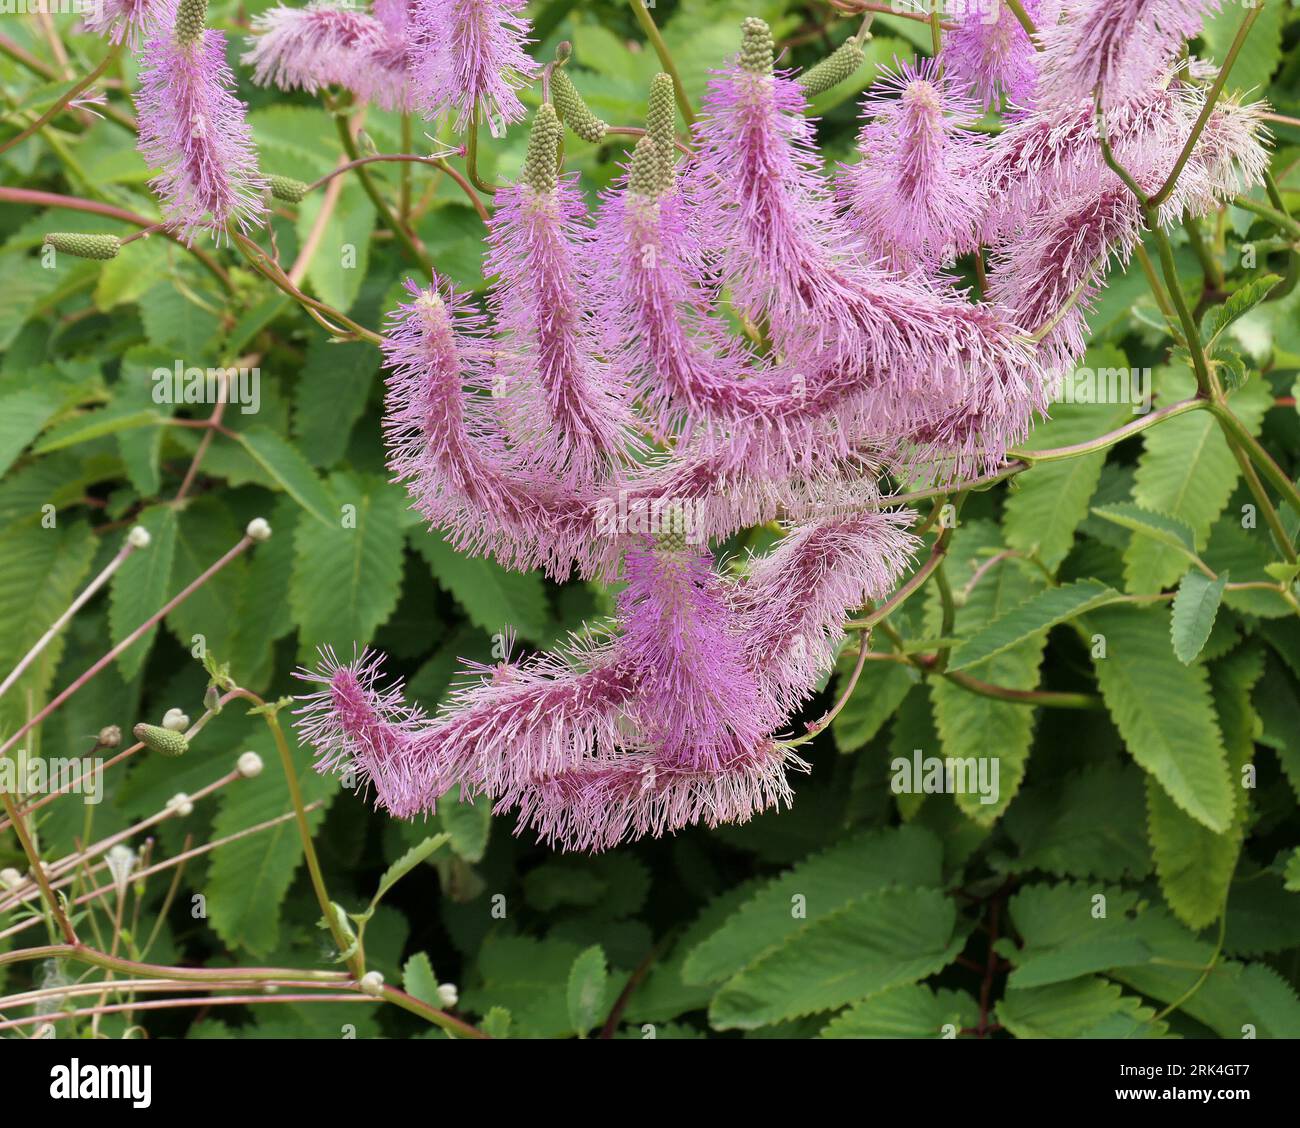 Closeup of the fluffy pink-purple hanging flowers of the summer and autumn herbaceous perennial garden plant sanguisorba hakusanensis lilac squirrel. Stock Photo